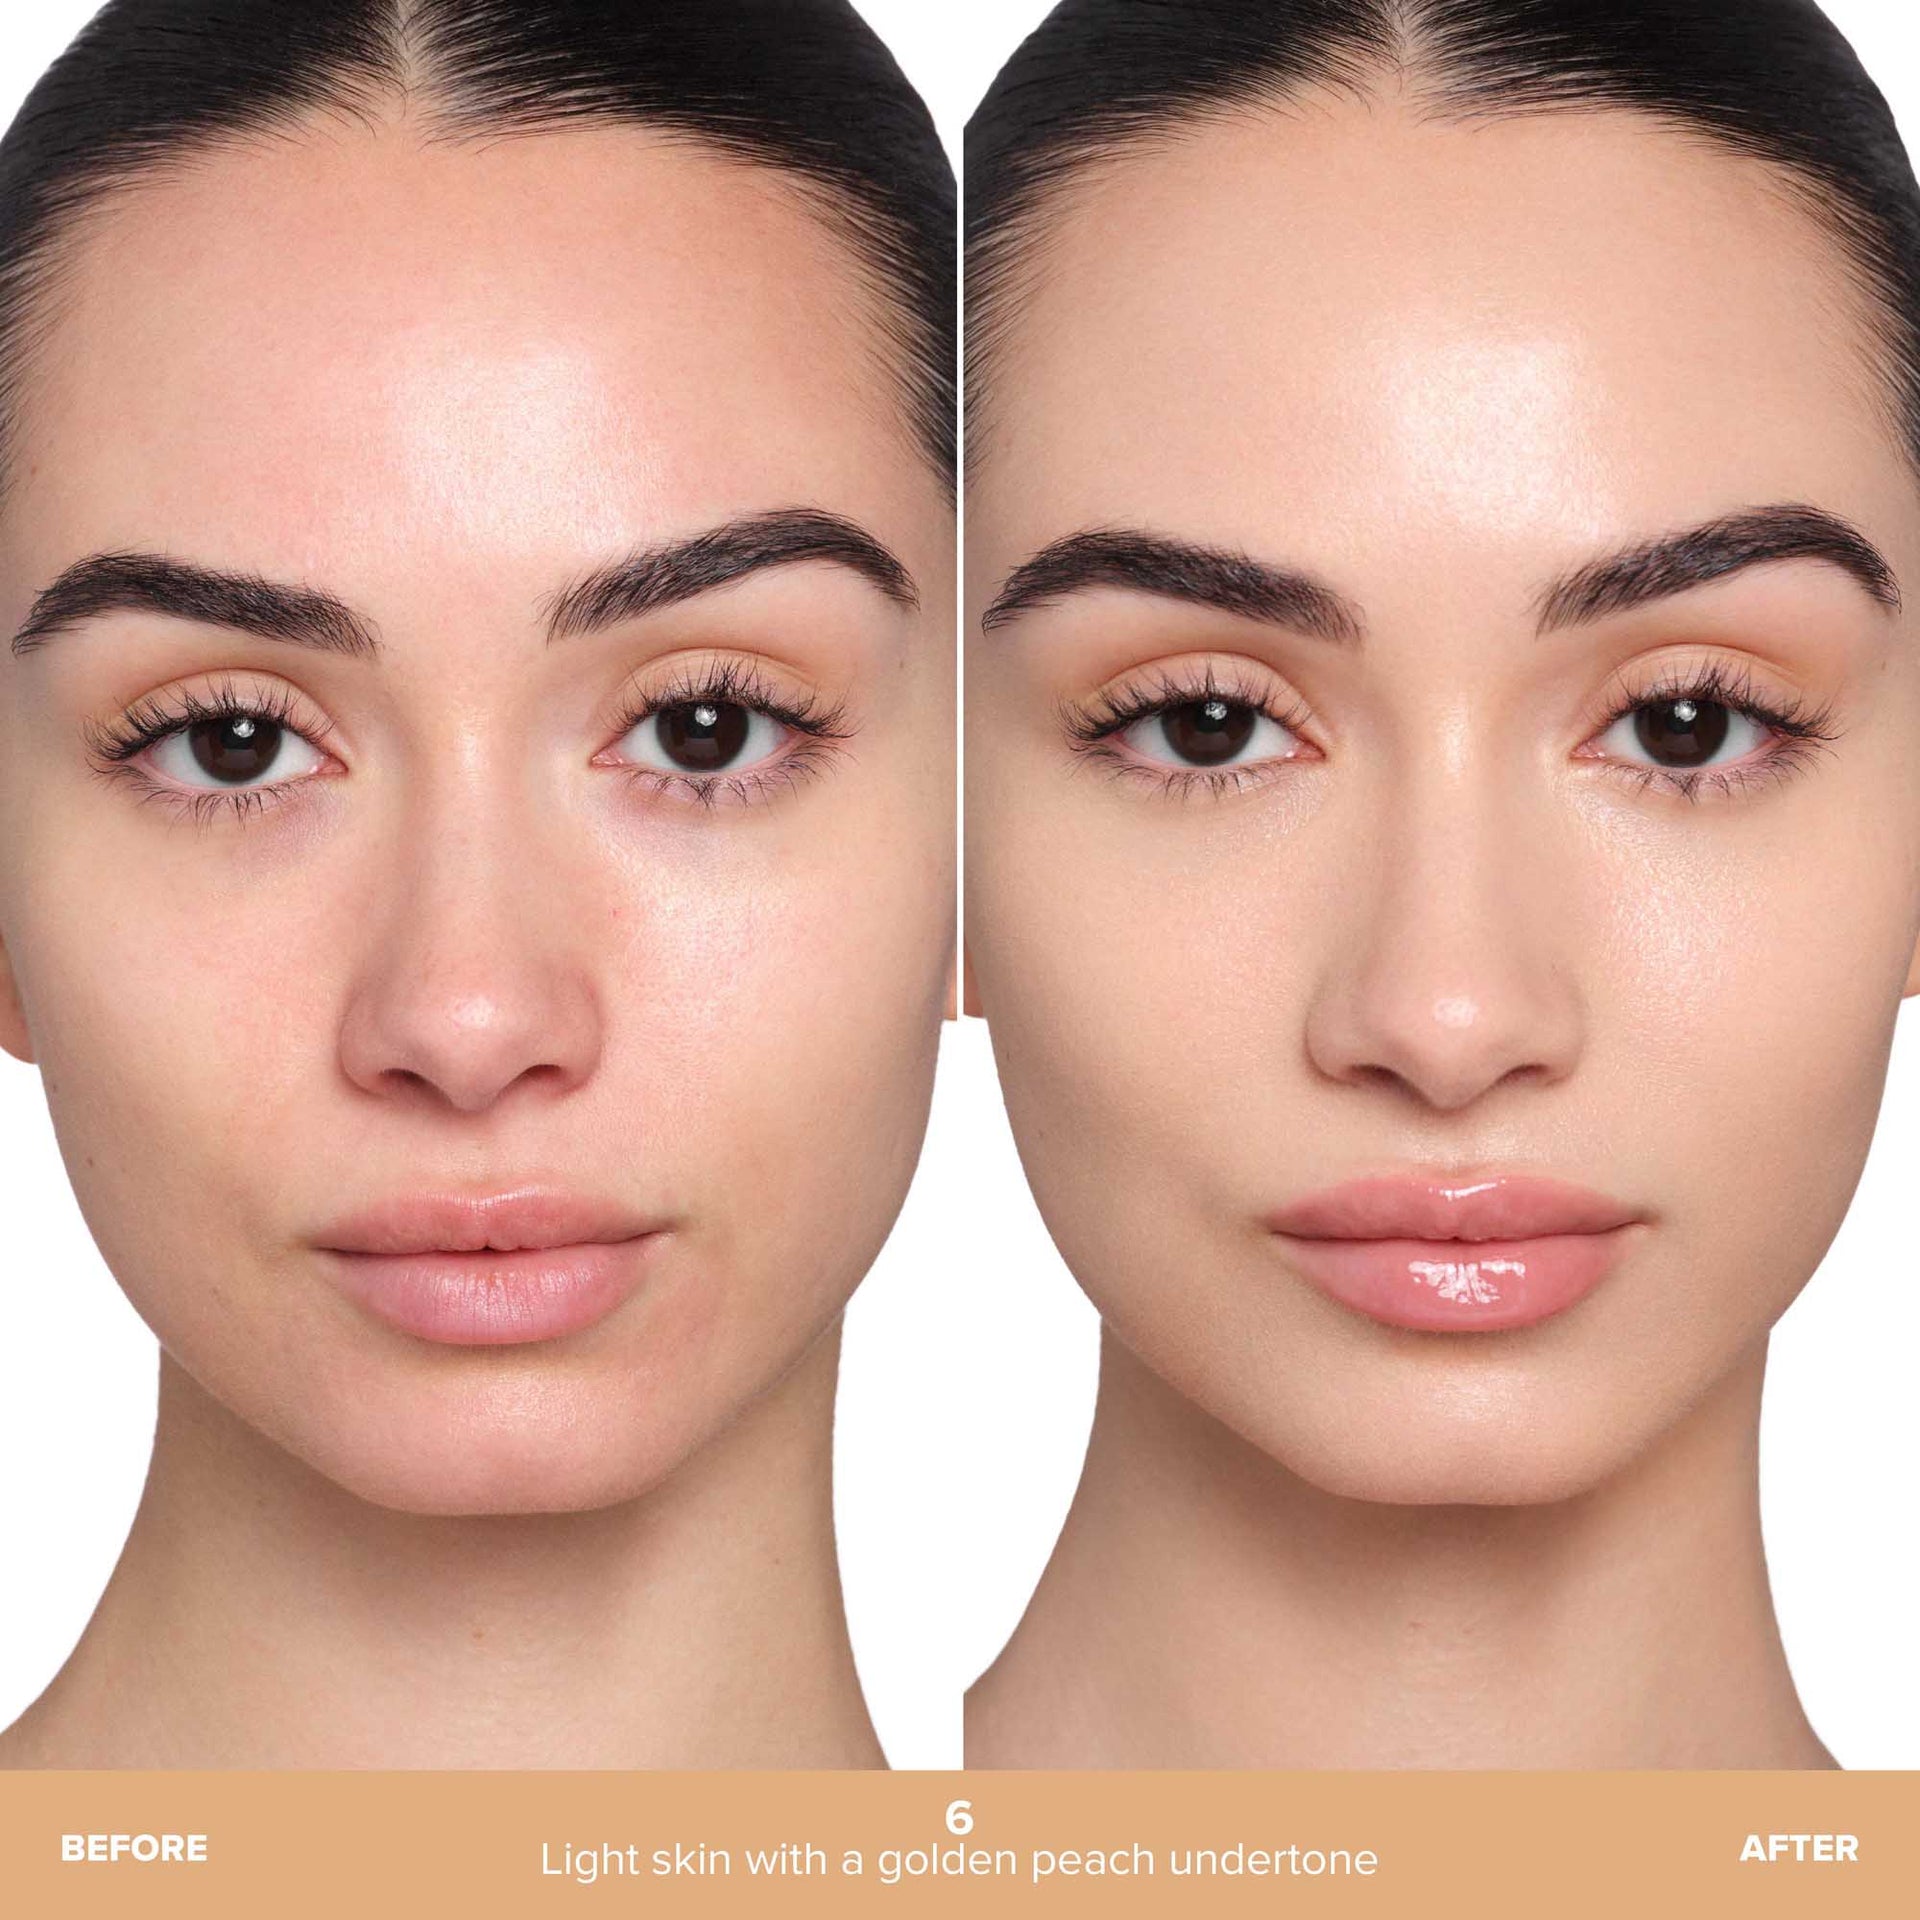 Shade 6 | Beauty Balm Serum Boosted Skin Tint Before & After - Shade 6